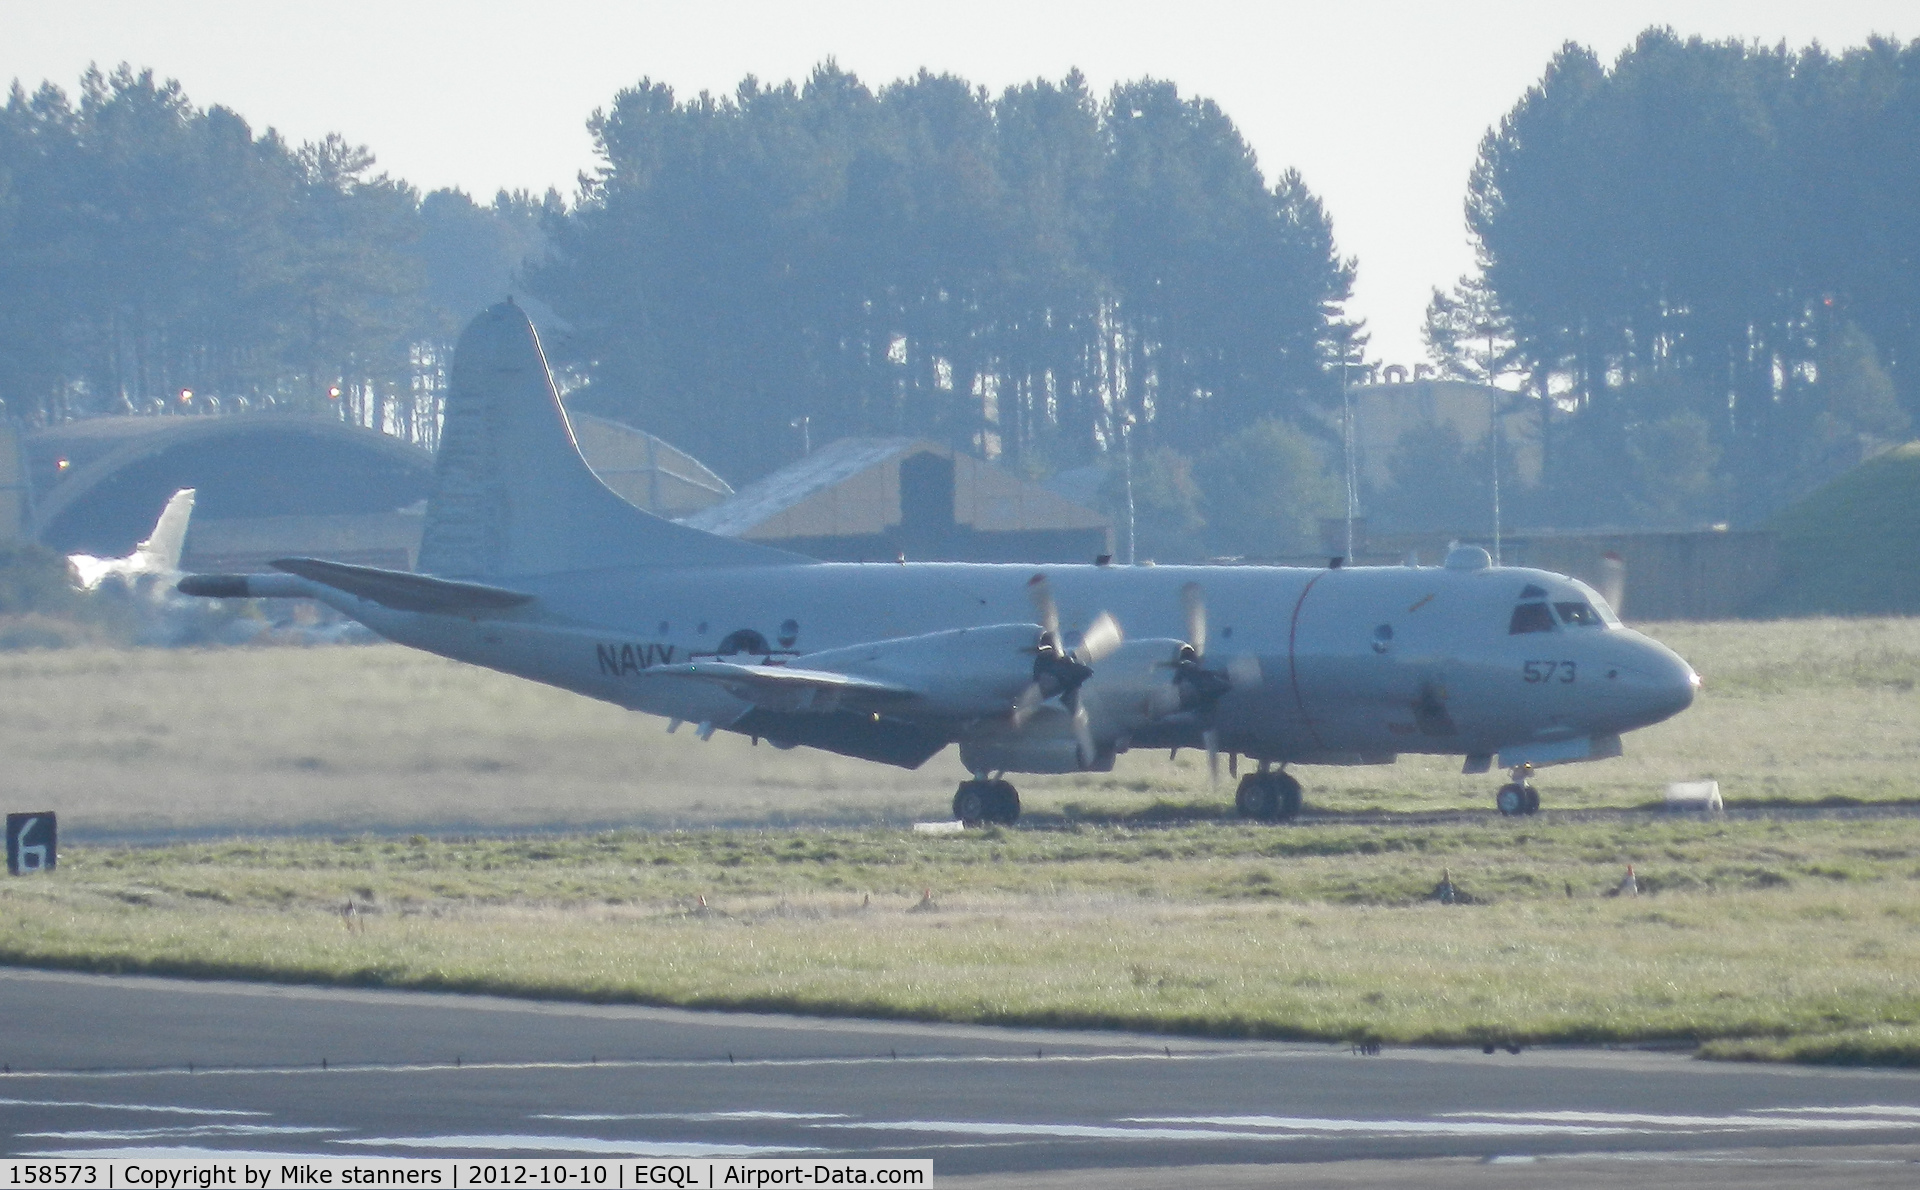 158573, 1972 Lockheed P-3C Orion C/N 285A-5582, VP-10 P-3C Orion taxiing to its dispersal area after completing a joint warrior mission,first pic in the database